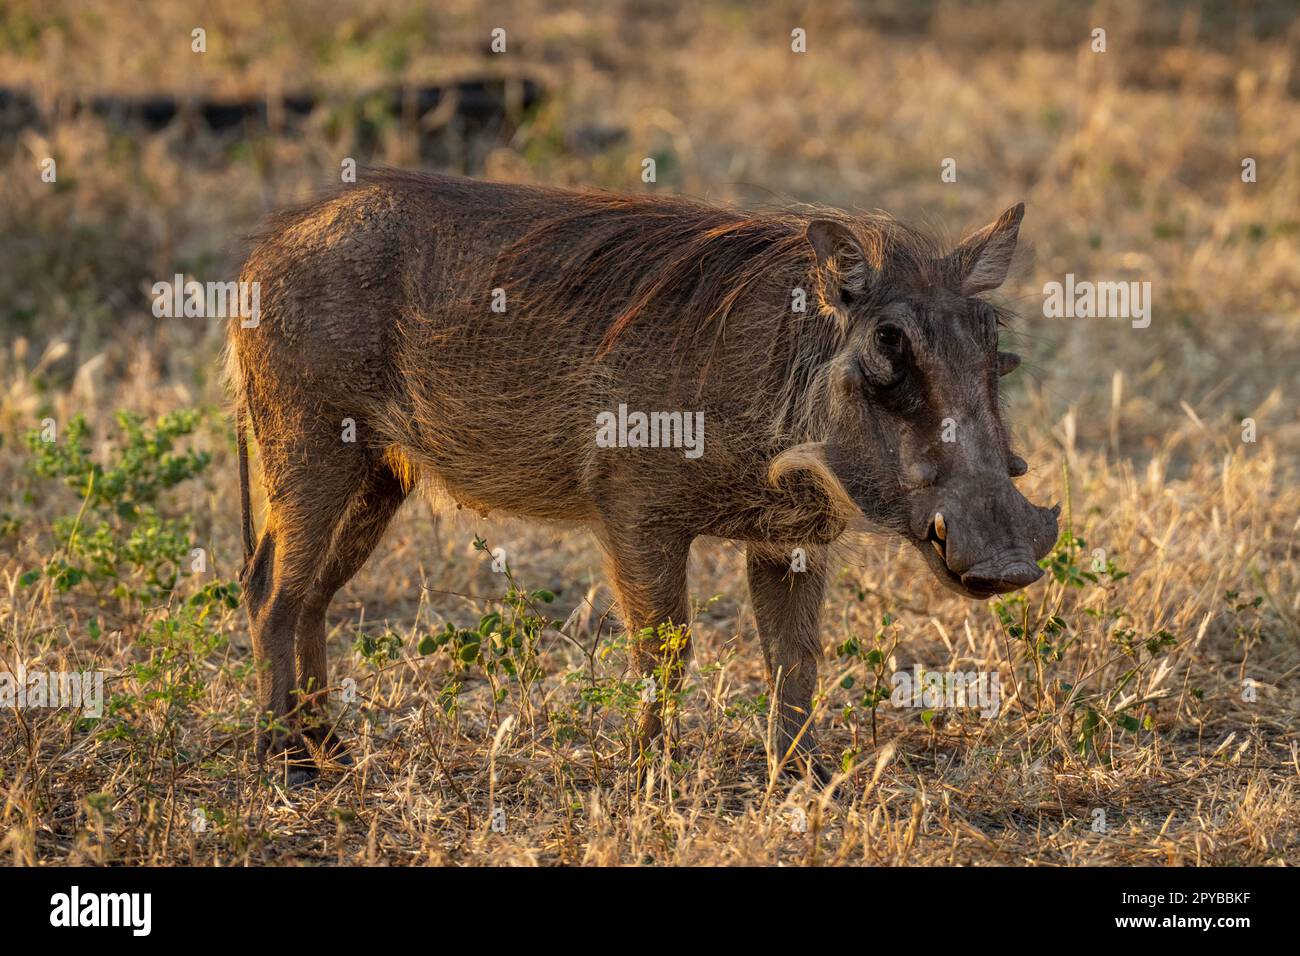 Common warthog stands on grass eyeing camera Stock Photo